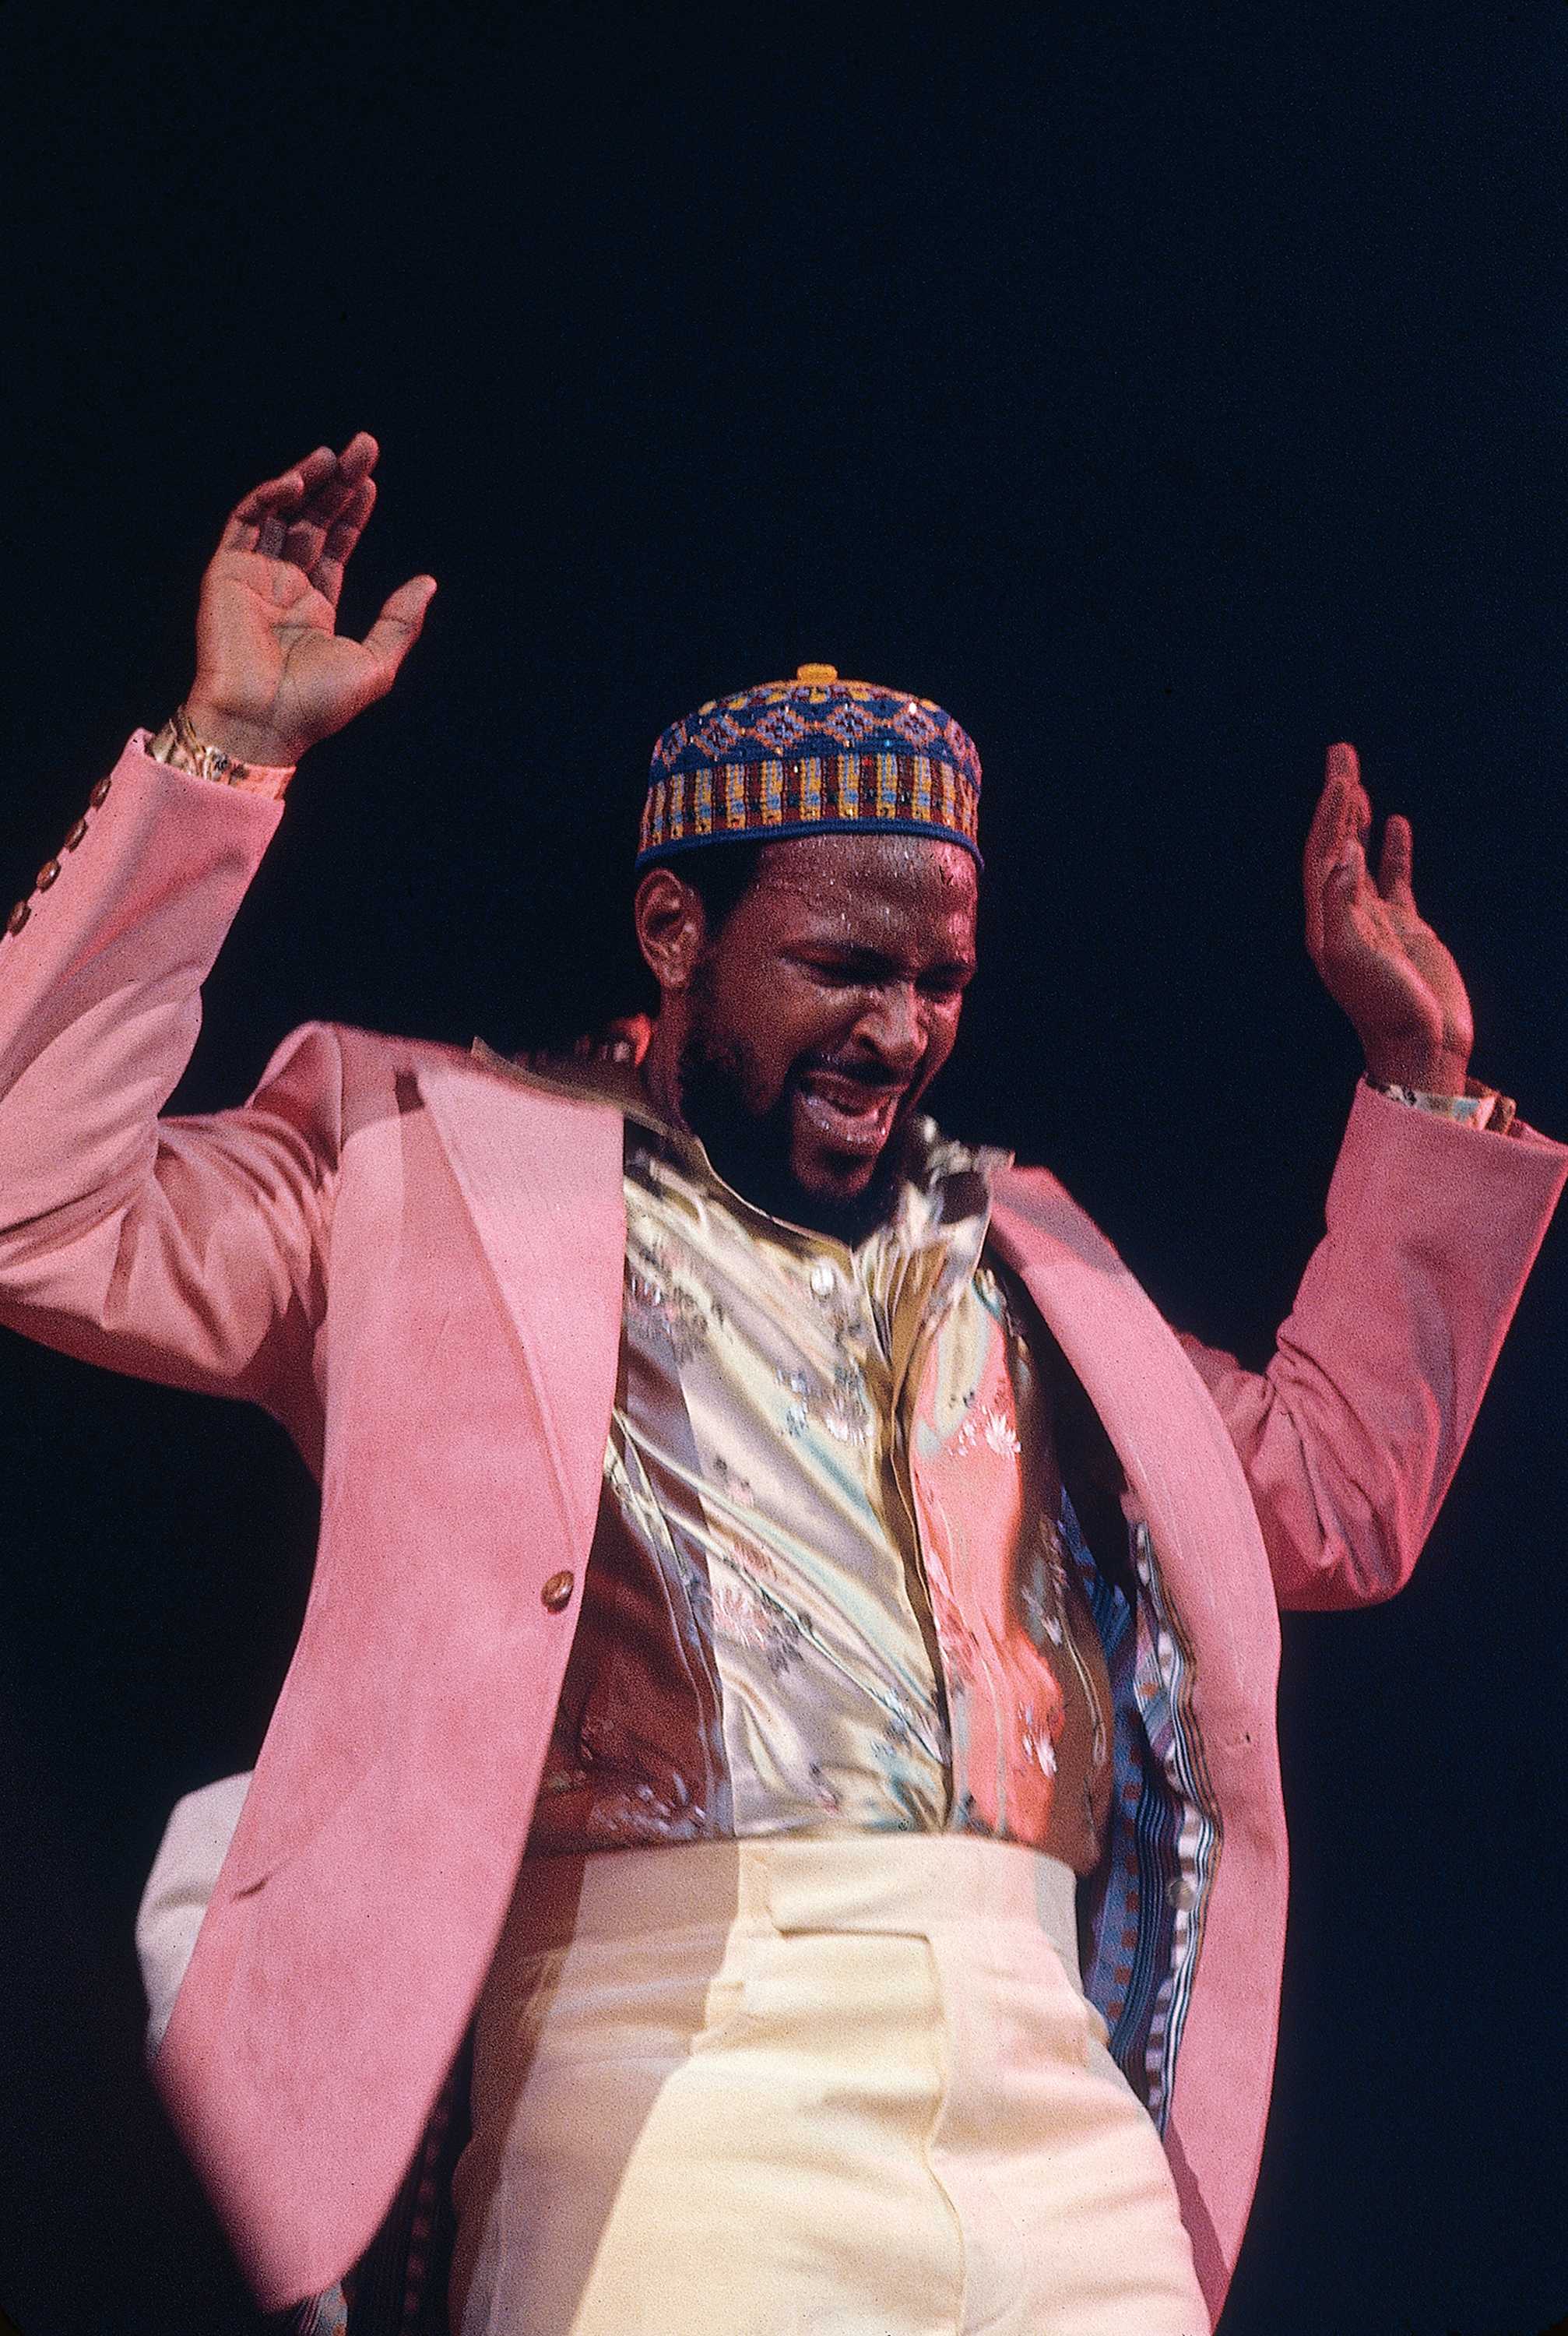 Photograph of Marvin Gaye in a purple jacket on stage performing